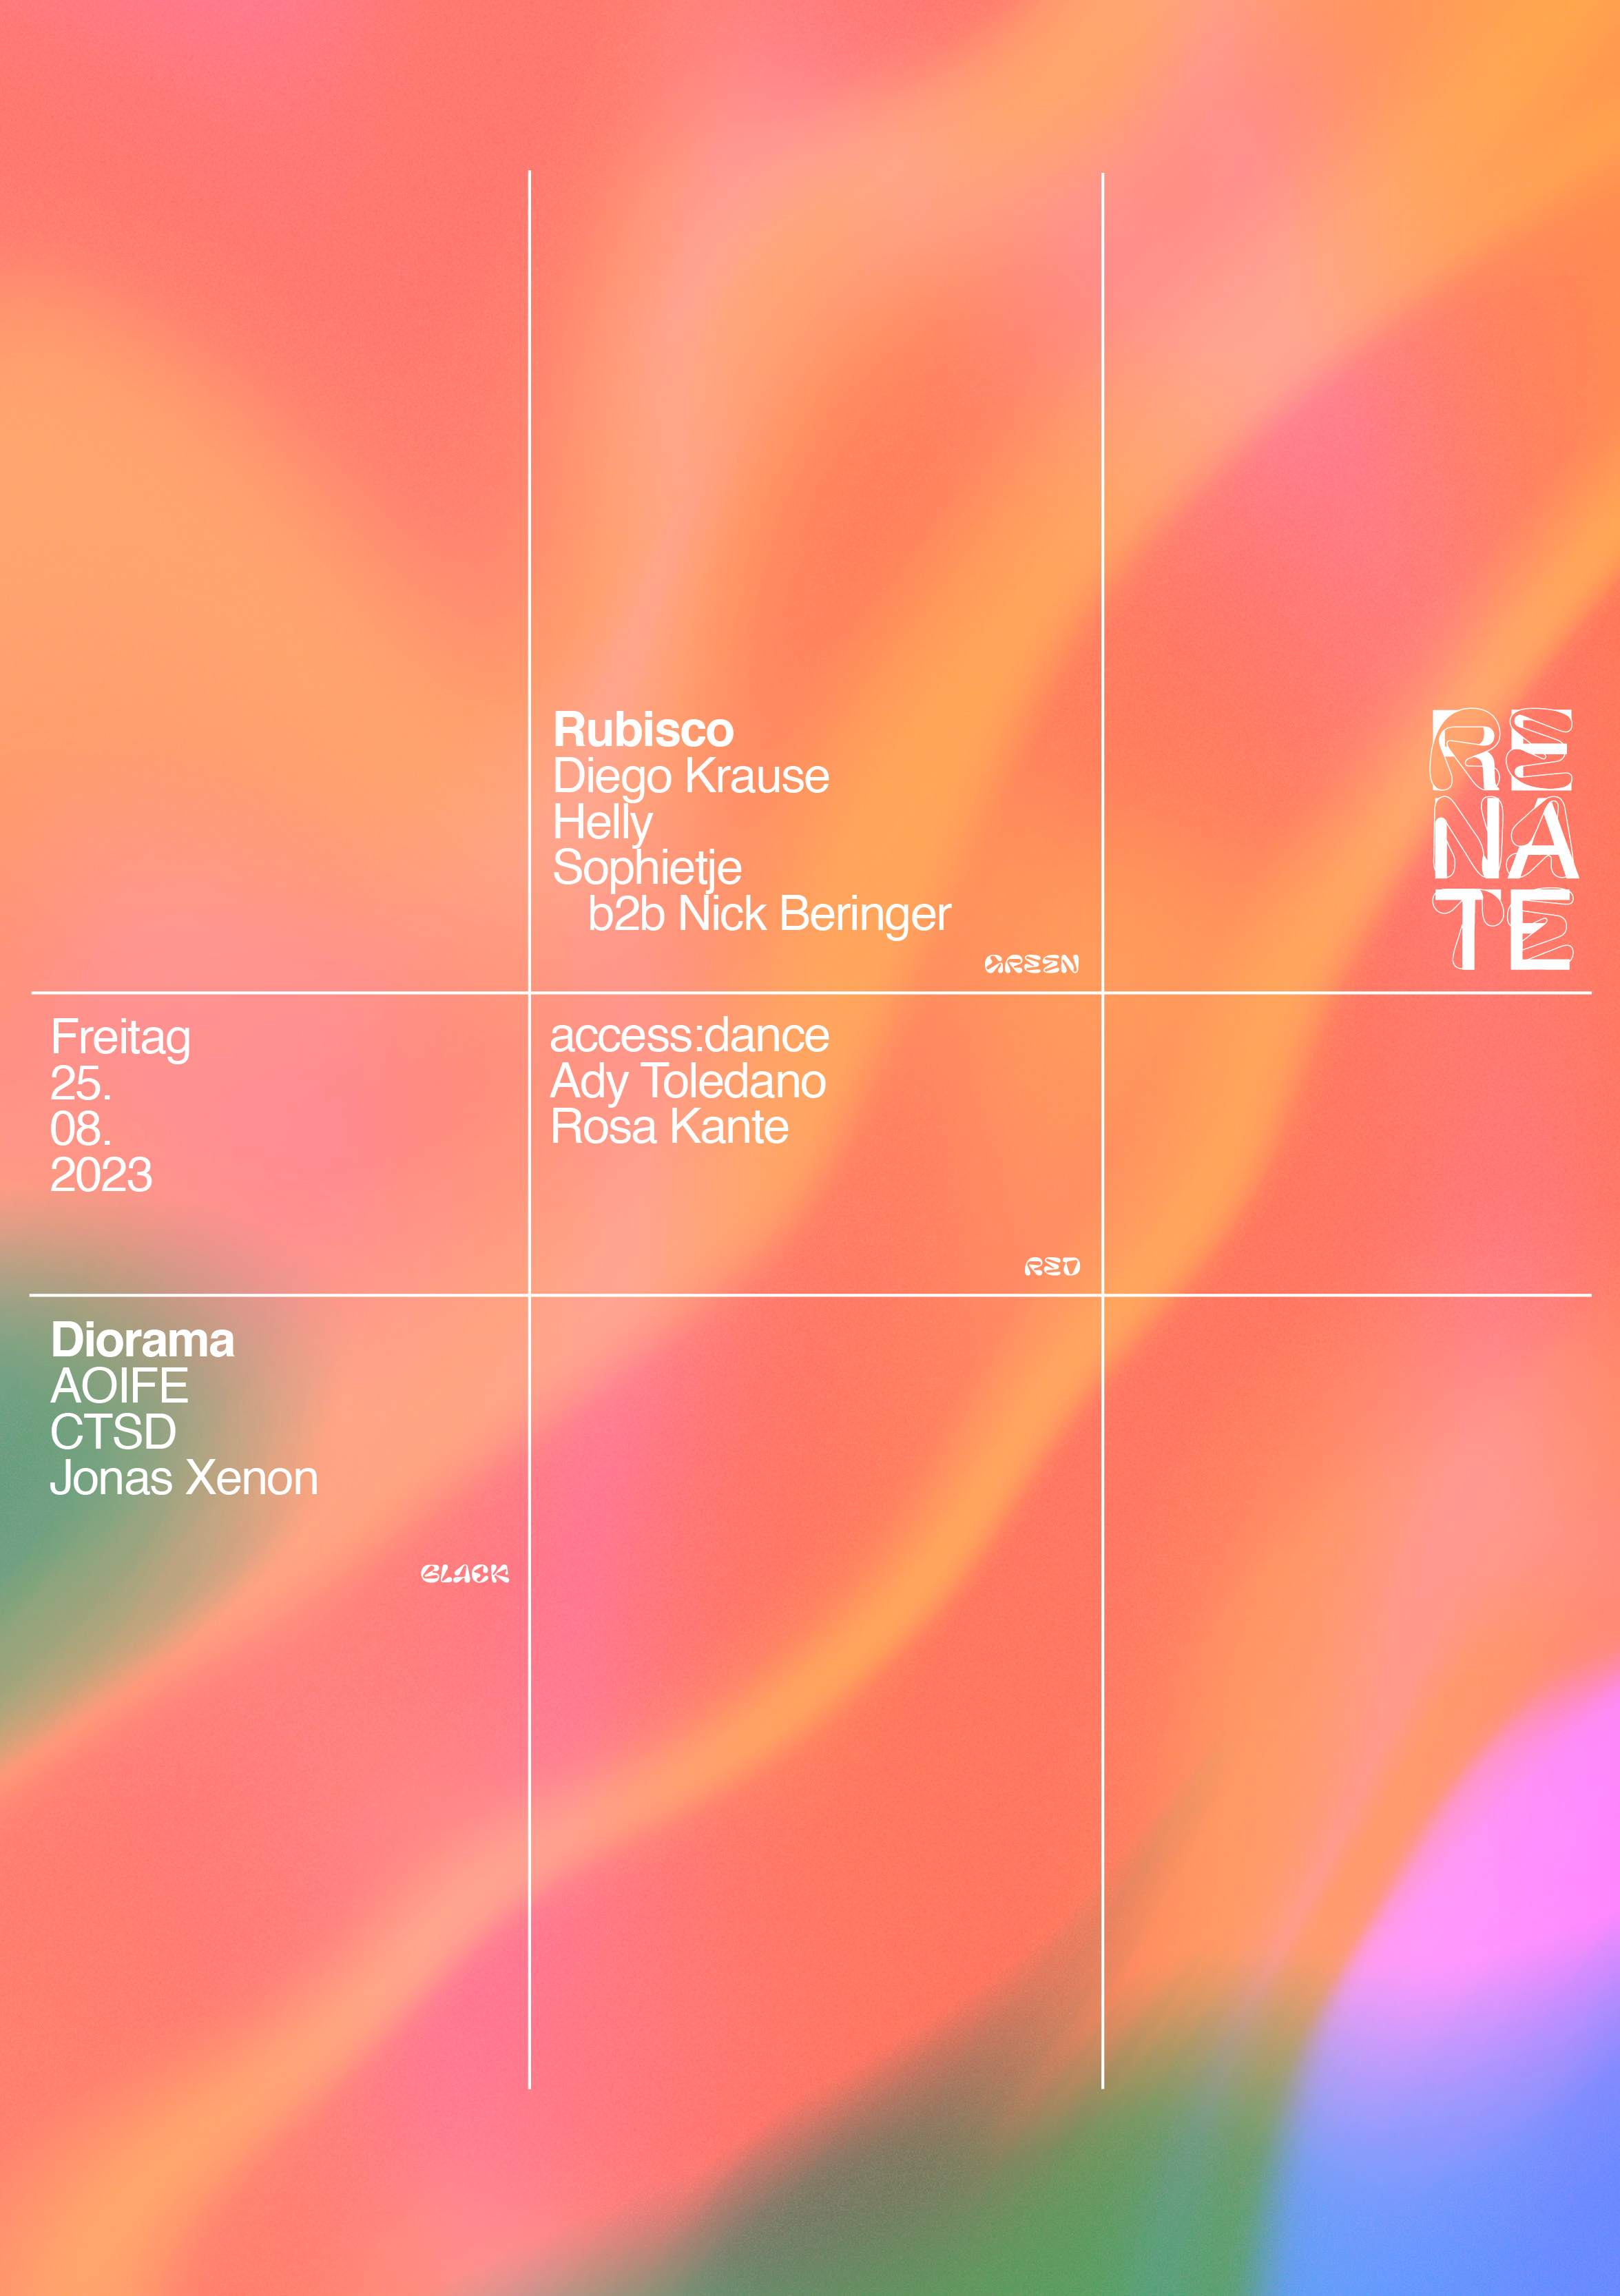 Renate with Helly, Nick Beringer, Ady Toledano, Diego Krause, AOIFE, CTSD + more - フライヤー表